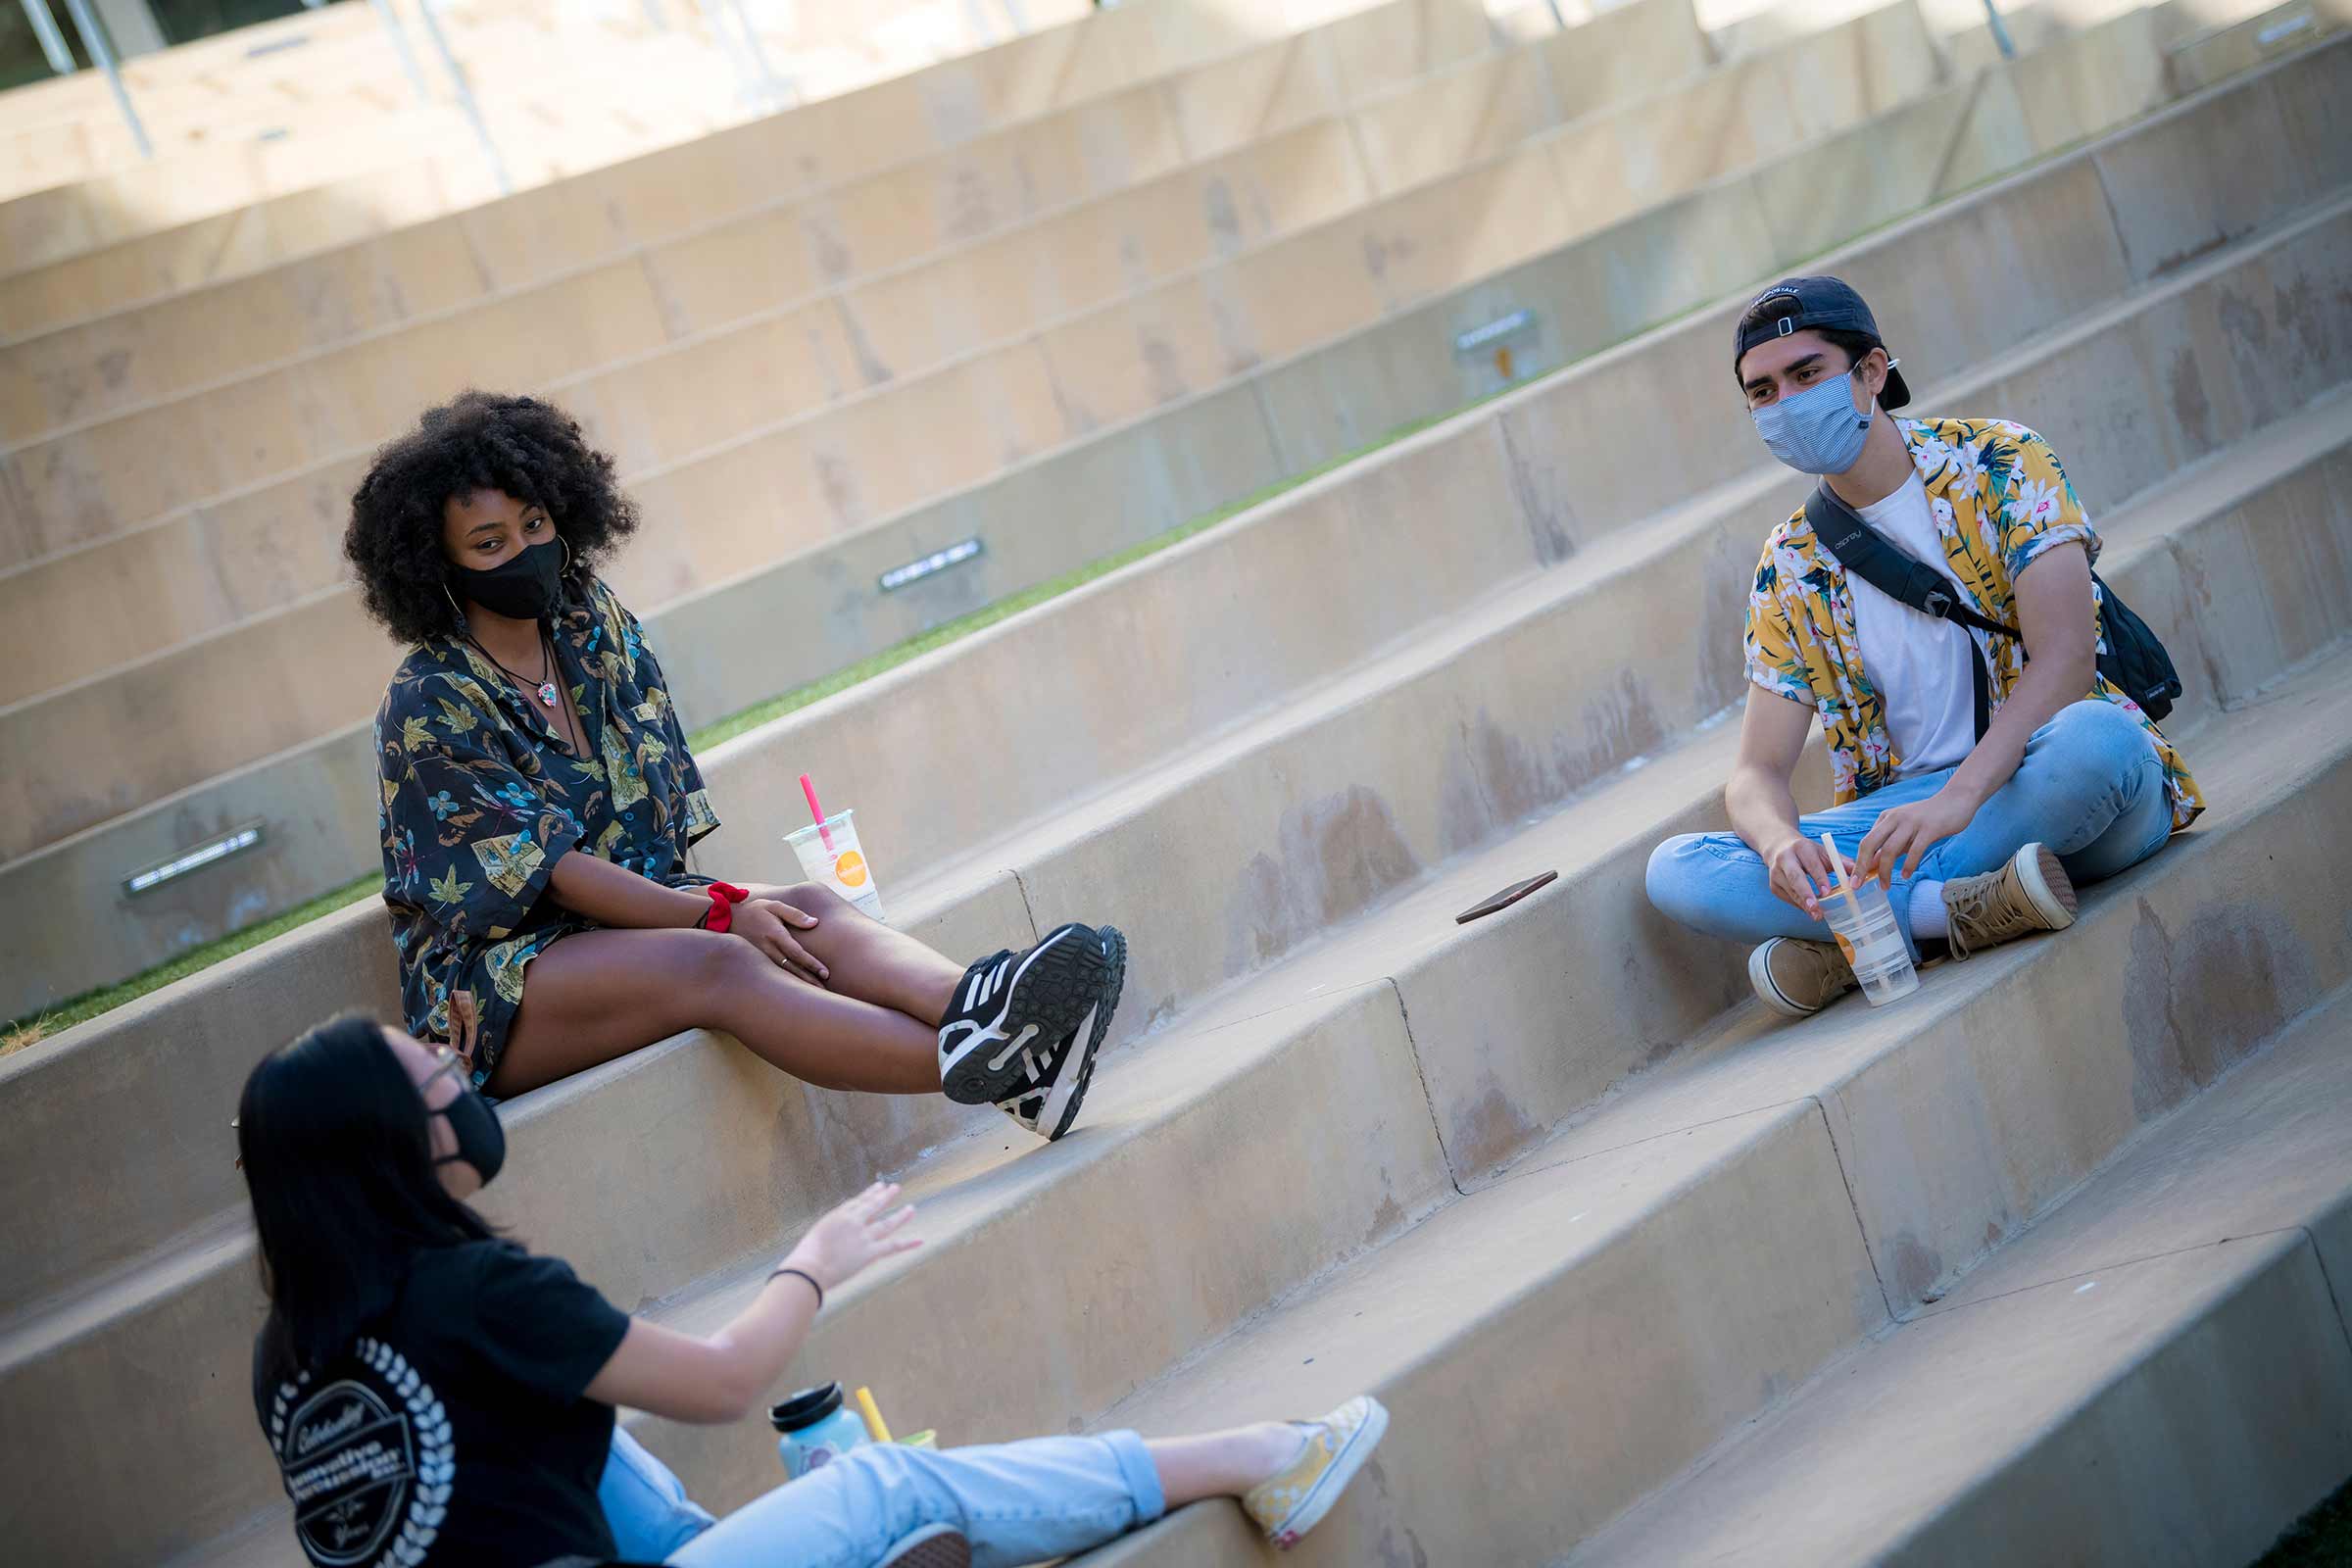 Students on campus in masks.